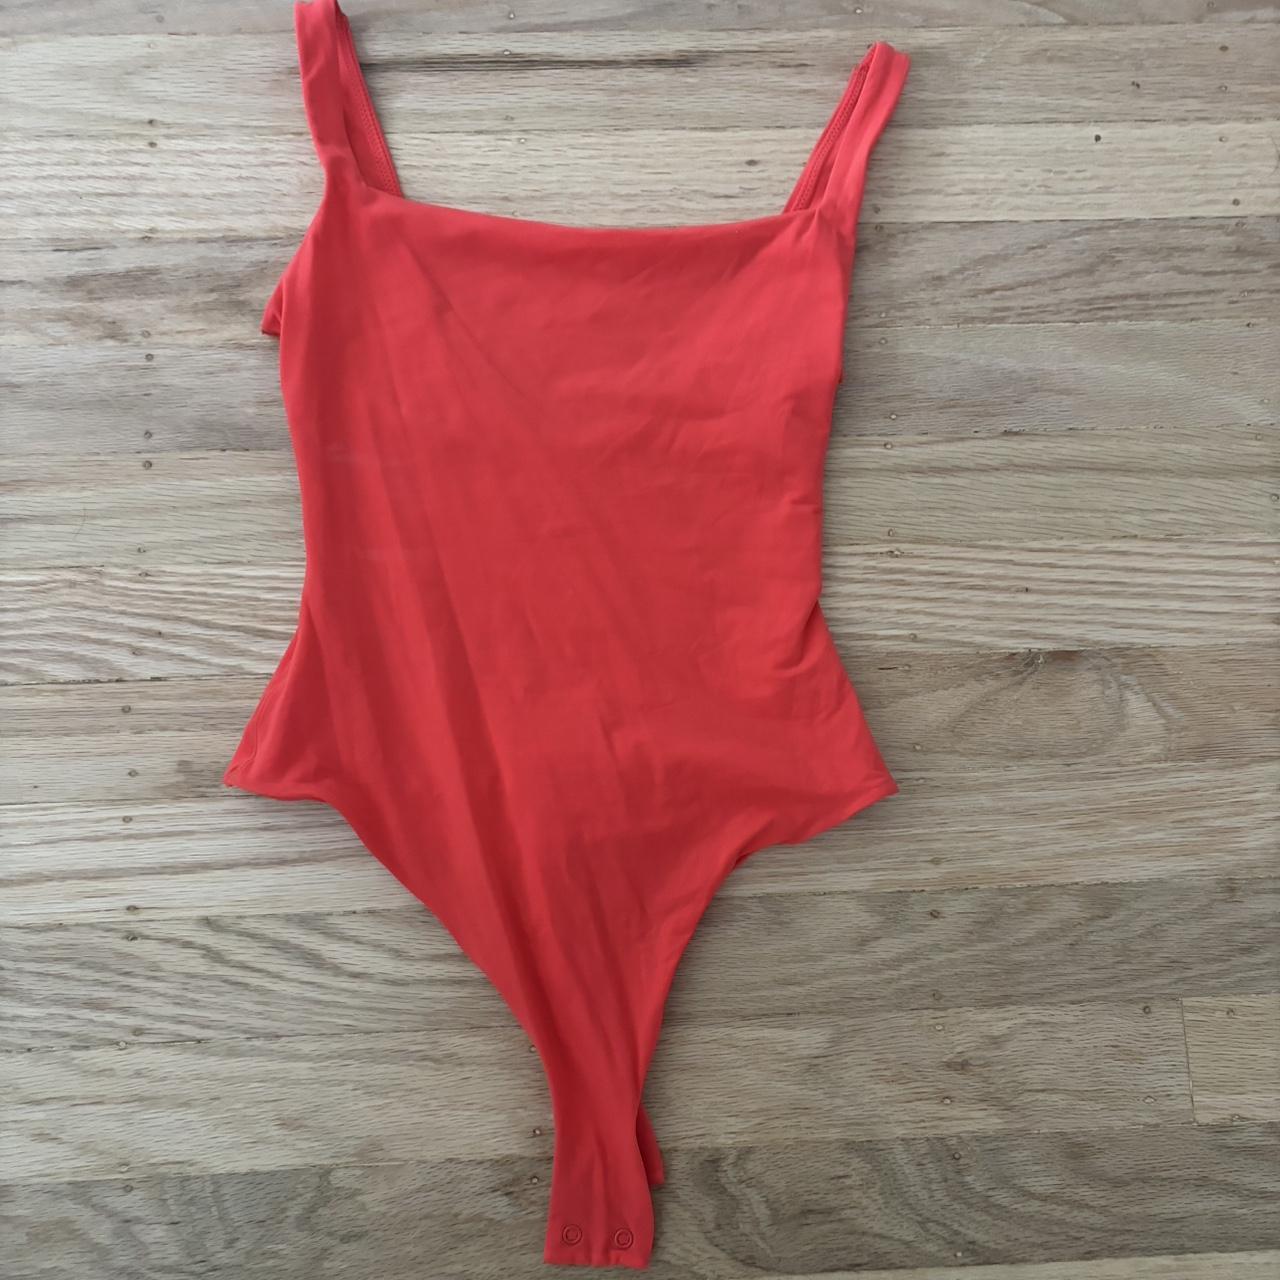 shapewear bodysuit Only worn once to try on - Depop